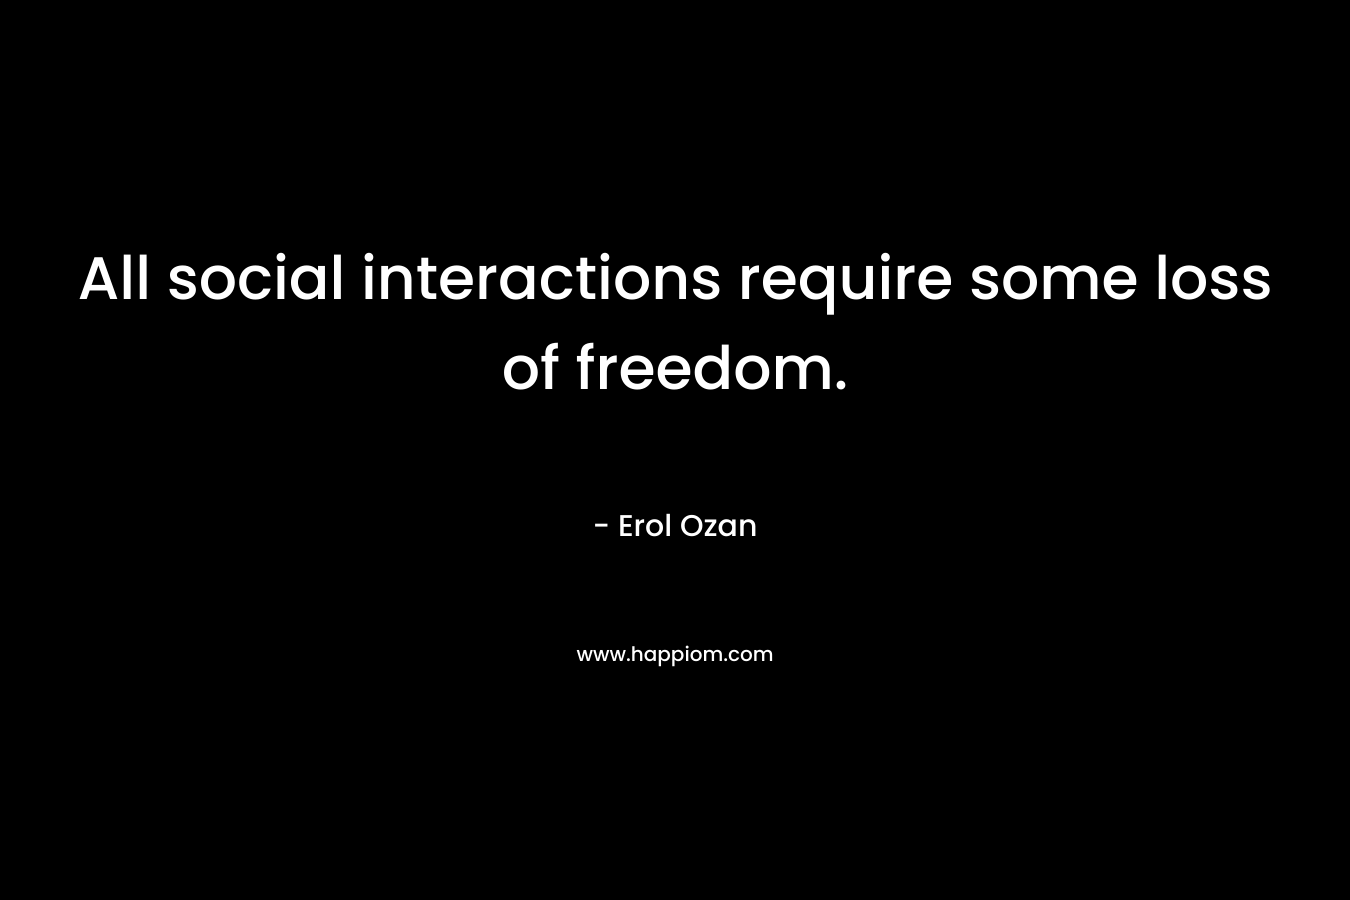 All social interactions require some loss of freedom. – Erol Ozan